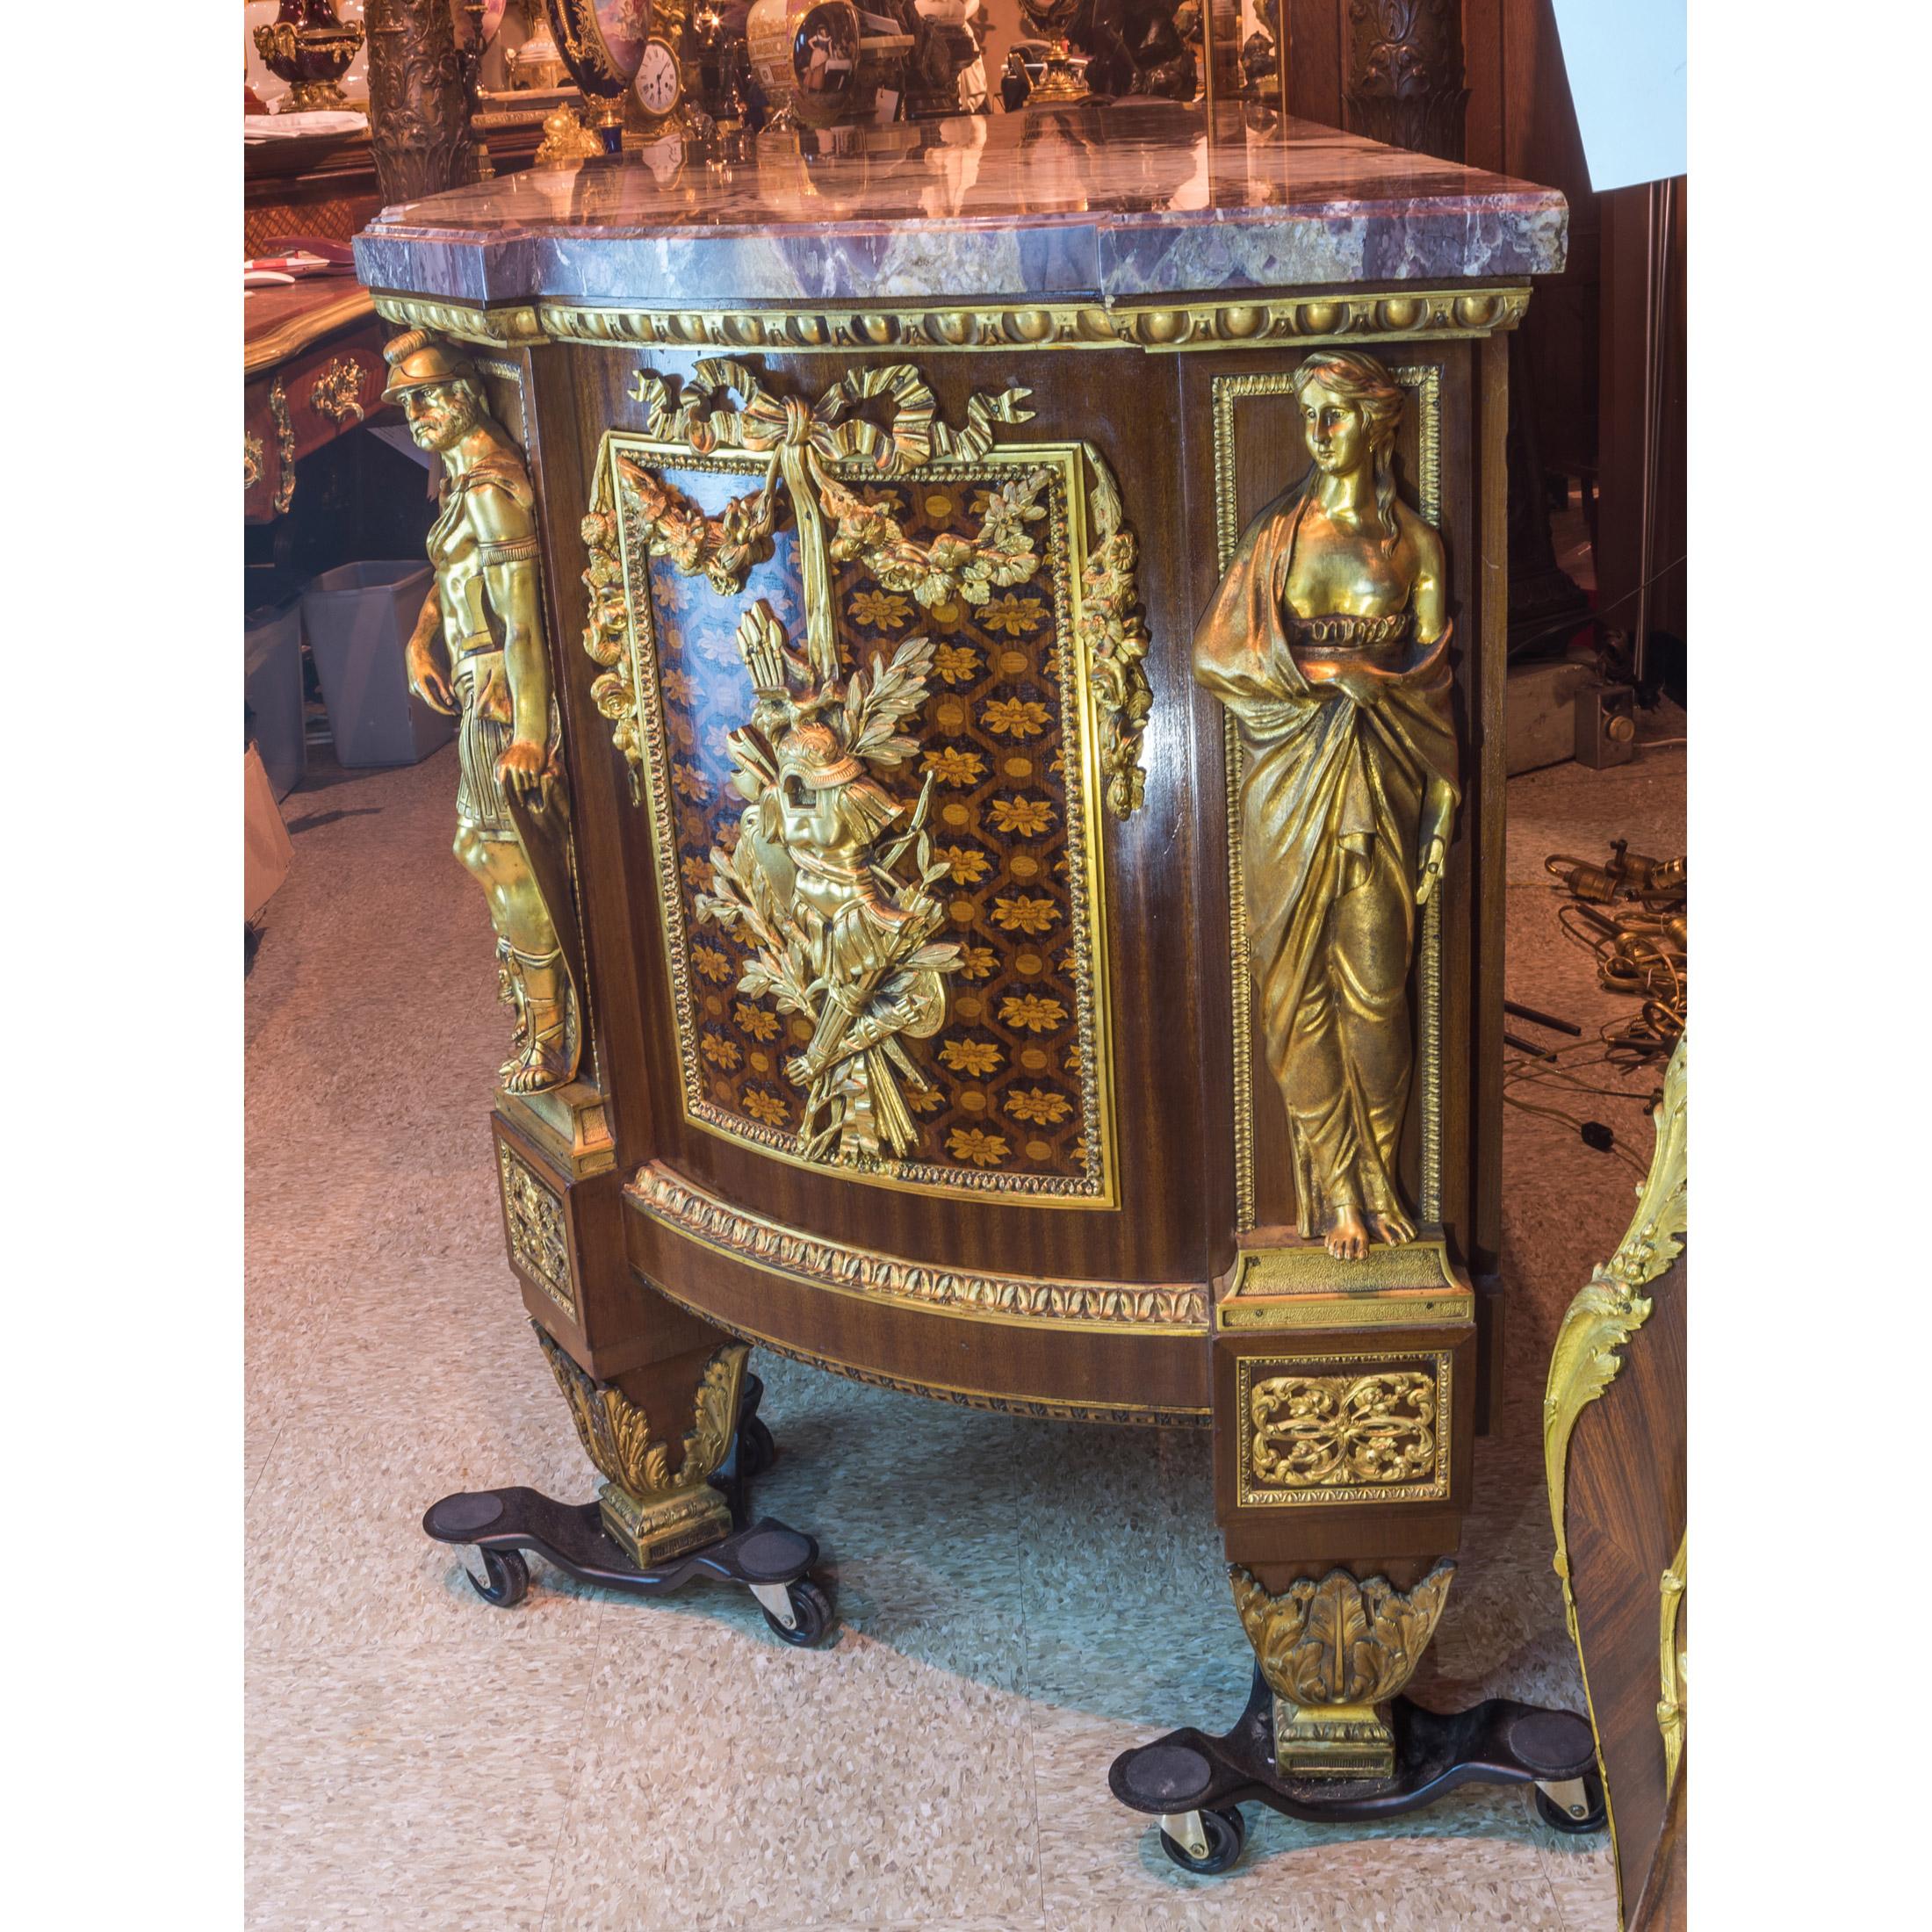 Stunning Louis XVI style gilt bronze mounted, mahogany and fruitwood marquetry and parquetry, armorial commode with marble top, after a model by Jean-Henri Riesener

Origin: French
Date: circa 1880
Dimension: 38